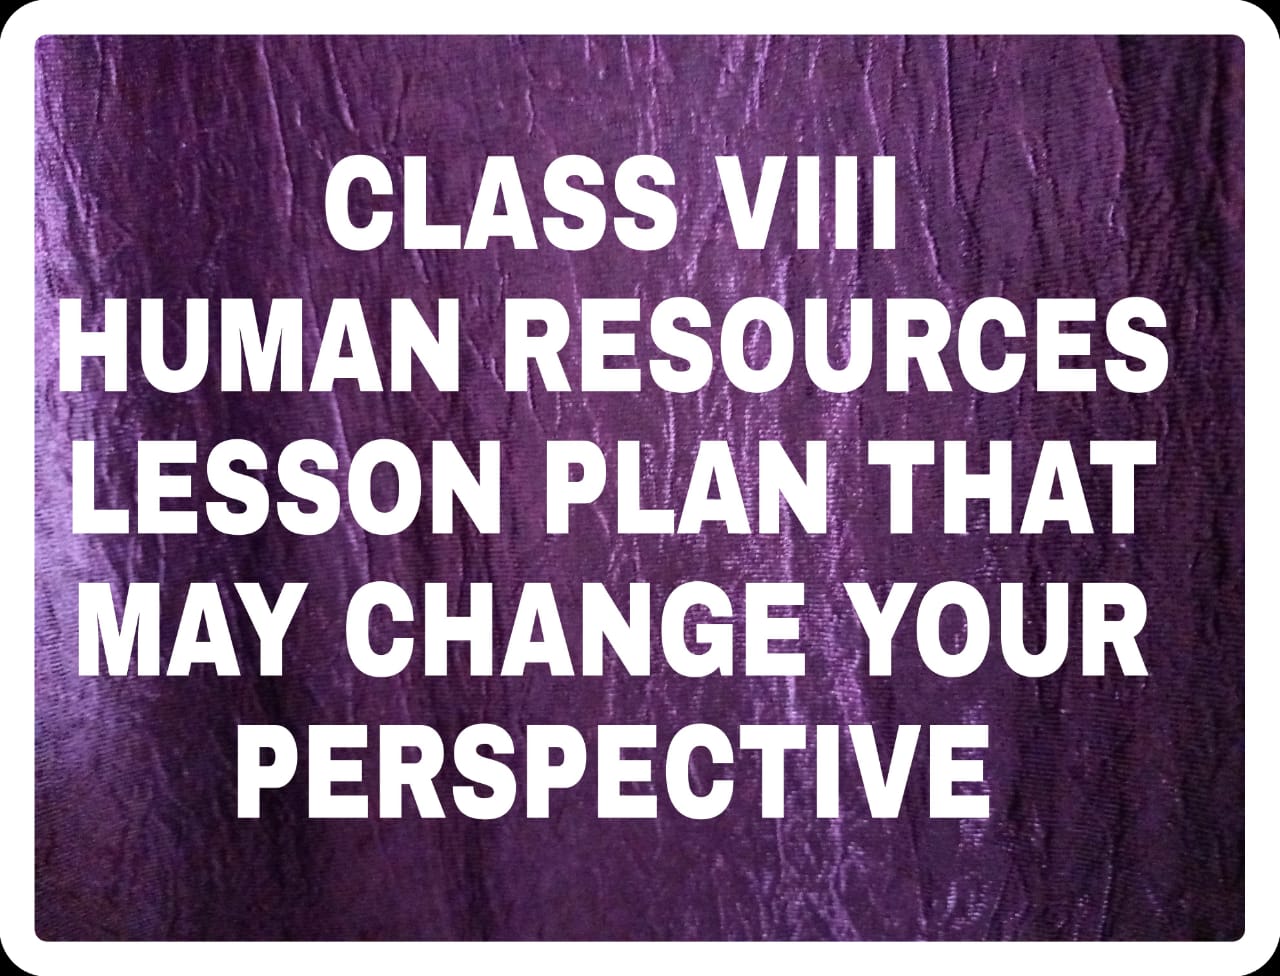 Class VIII Human Resources Lesson Plan That May Change Your Perspective